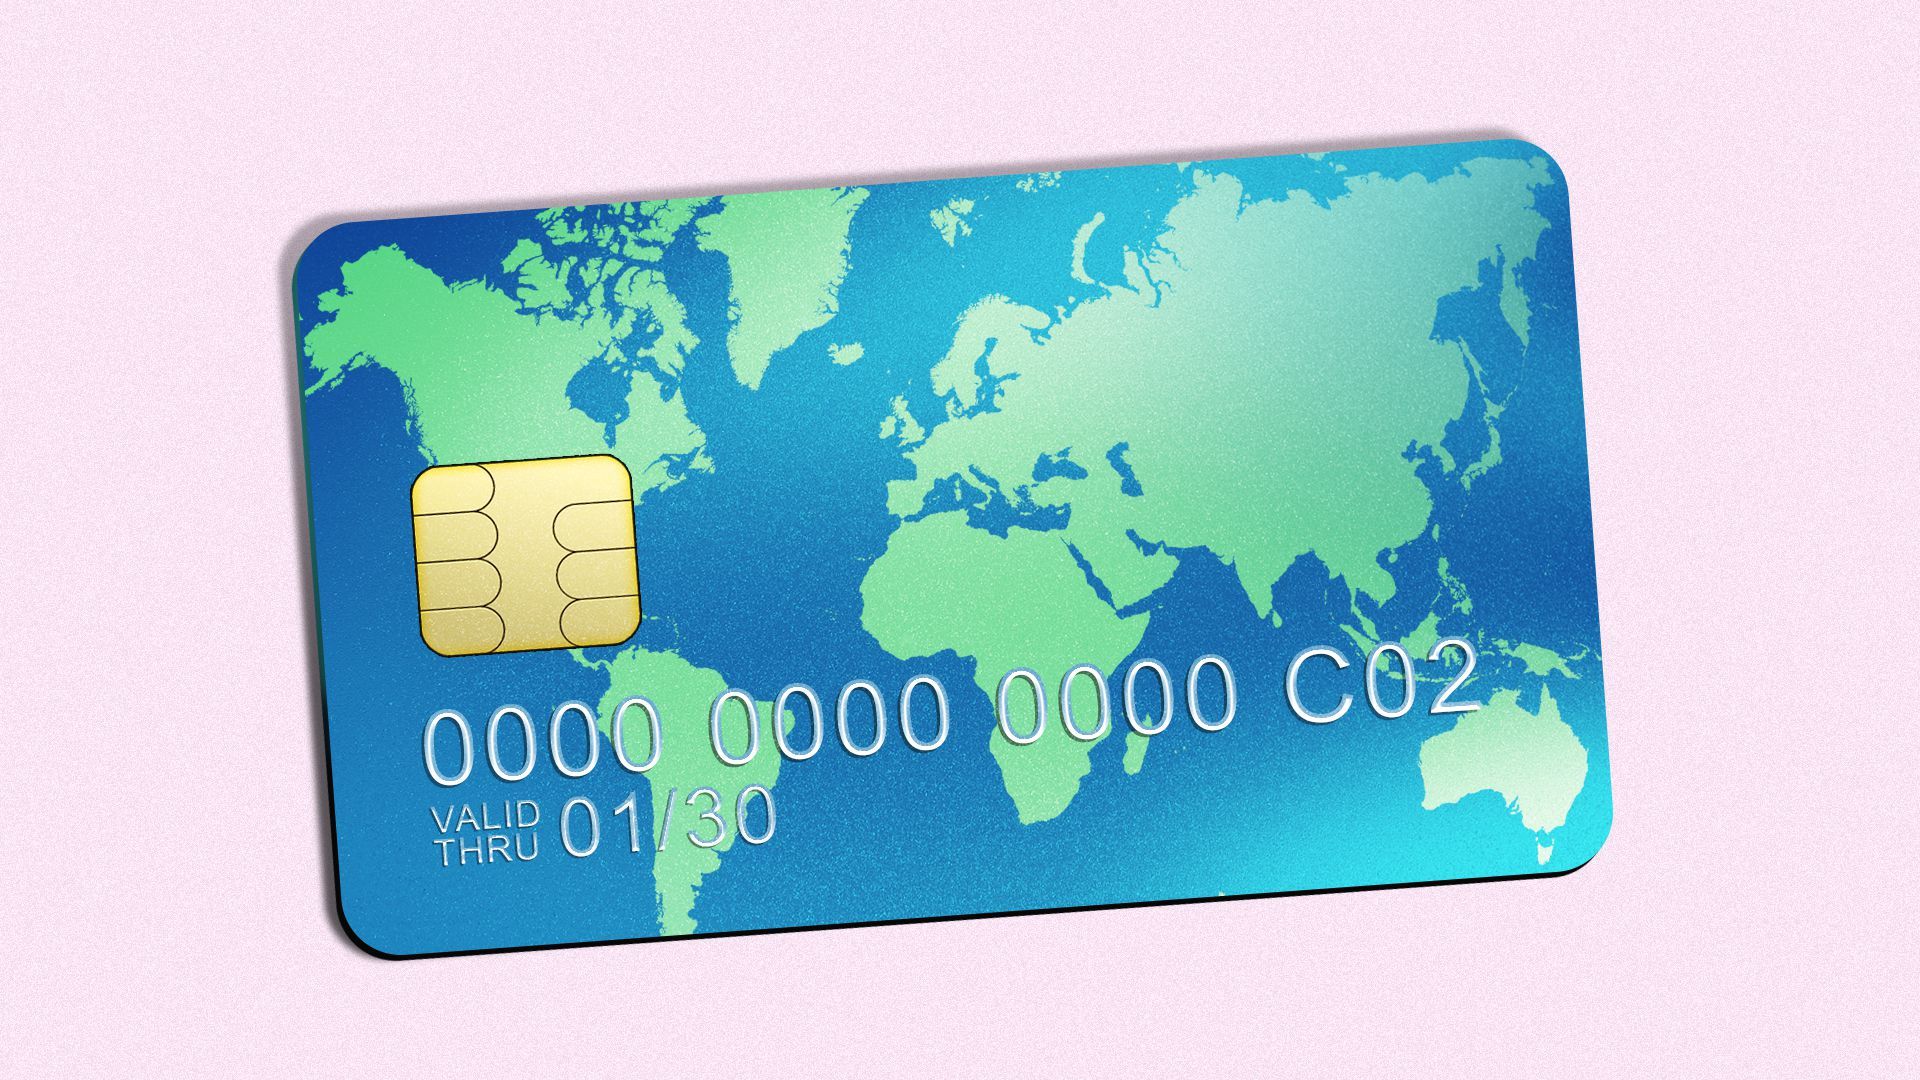 Illustration of a credit card in the shape of the word